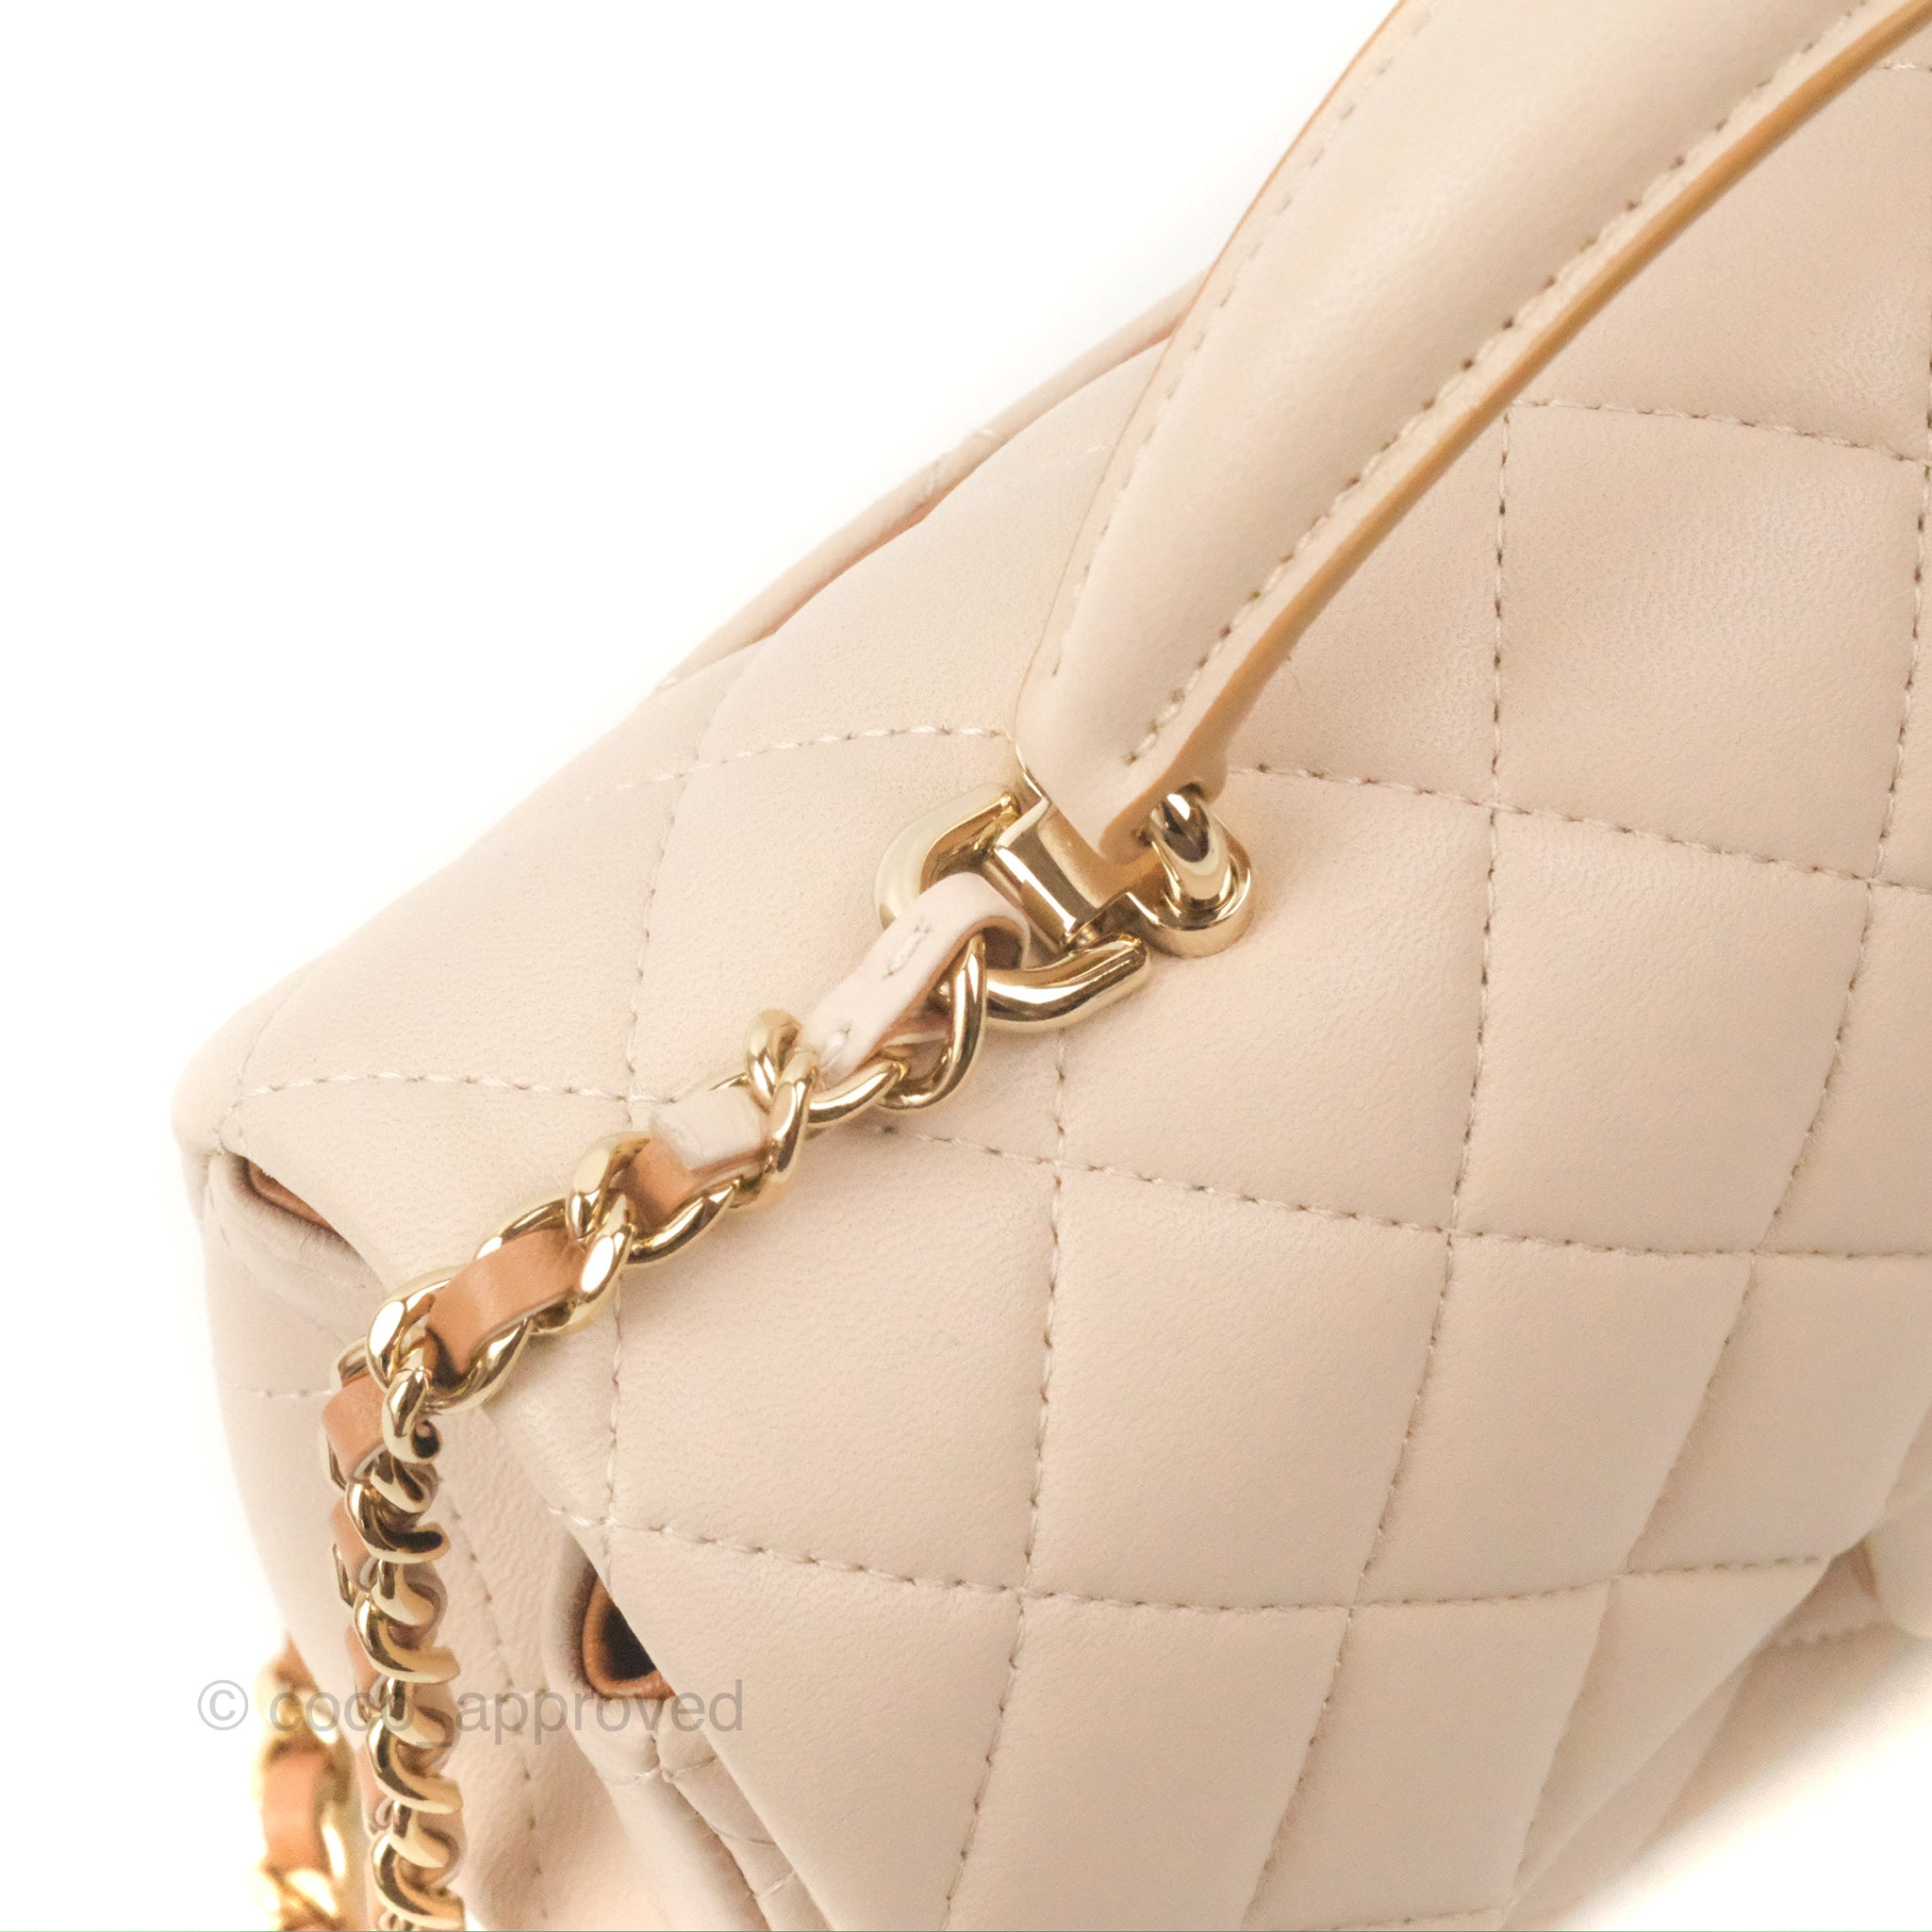 Sold at Auction: Chanel Rectangular Mini Flap Lambskin Shoulder Bag in Pink  With Gold Hardware Measures L12cm Chain Drop 52.5cm W 19cm D 7cm. Comes  With Original Box, Dustbag And Authenticity Card.